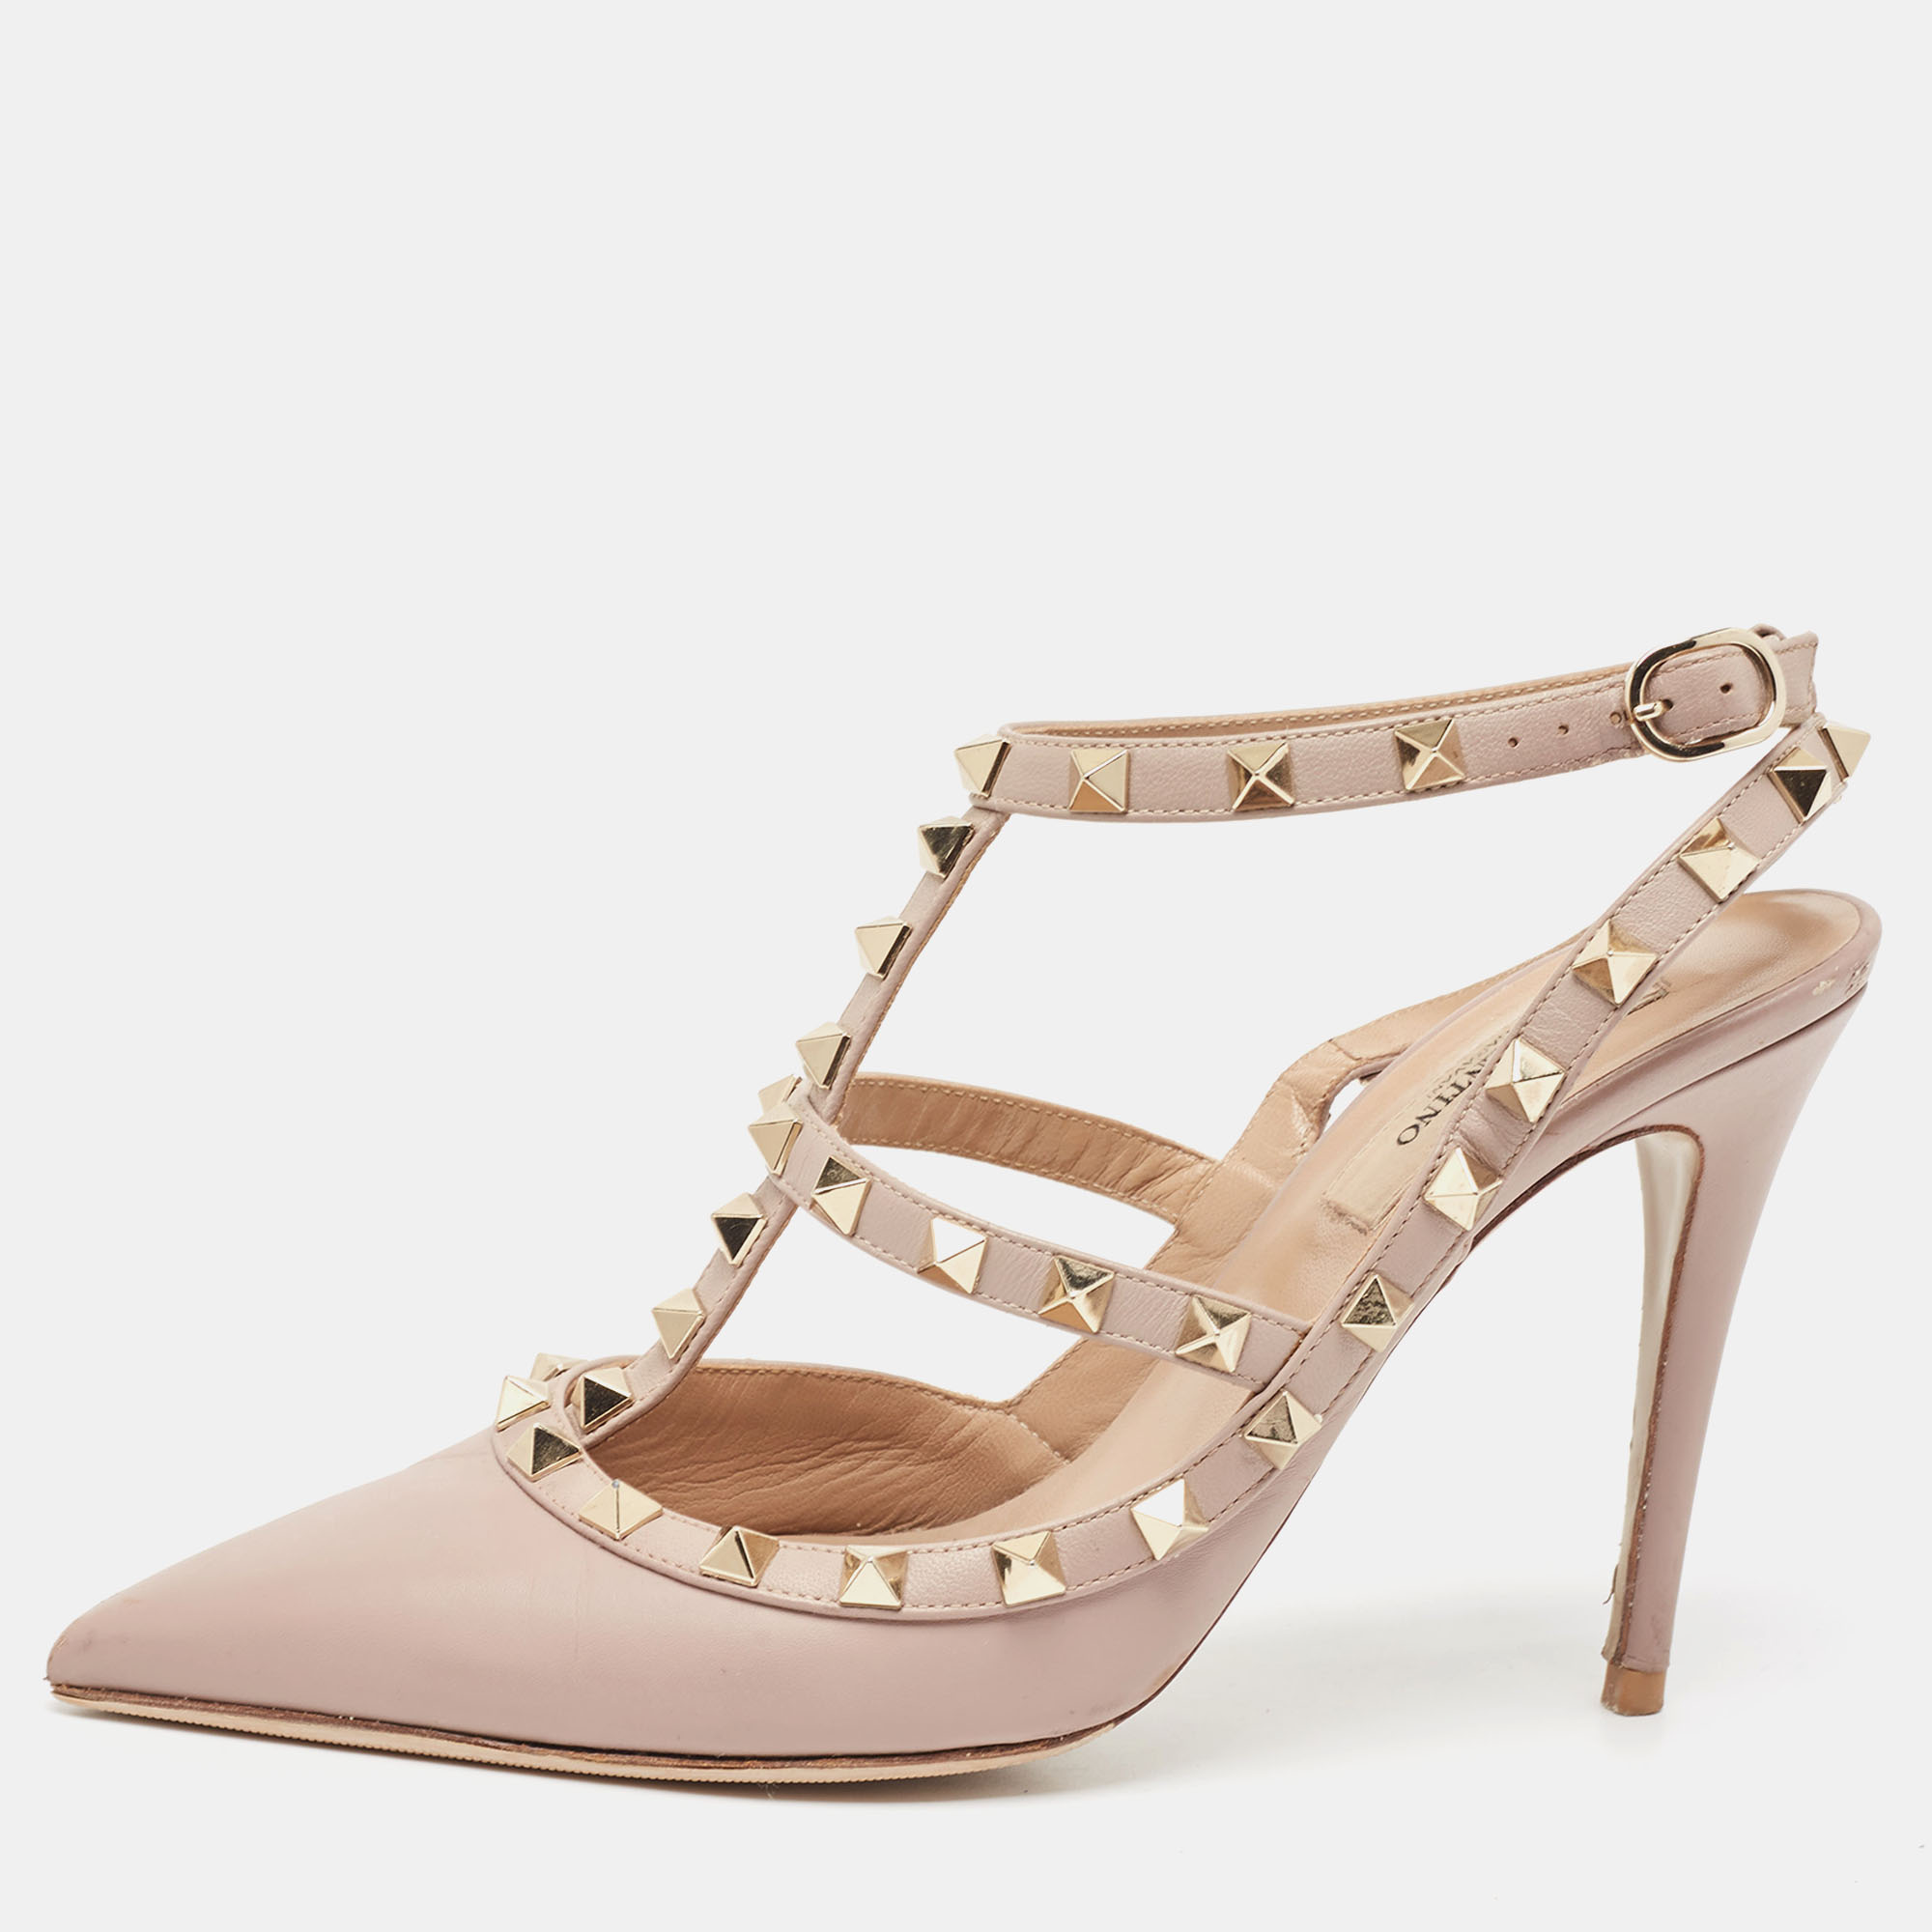 With meticulous craftsmanship and glamorous details this Valentino pair of pumps reflects the brands expertise in creating innovative and admirable designs. The Rockstuds elegantly outlines the upper straps and make it undeniably chic. Created from pink leather its pointed toes and 11cm heels will elongate your appearance.